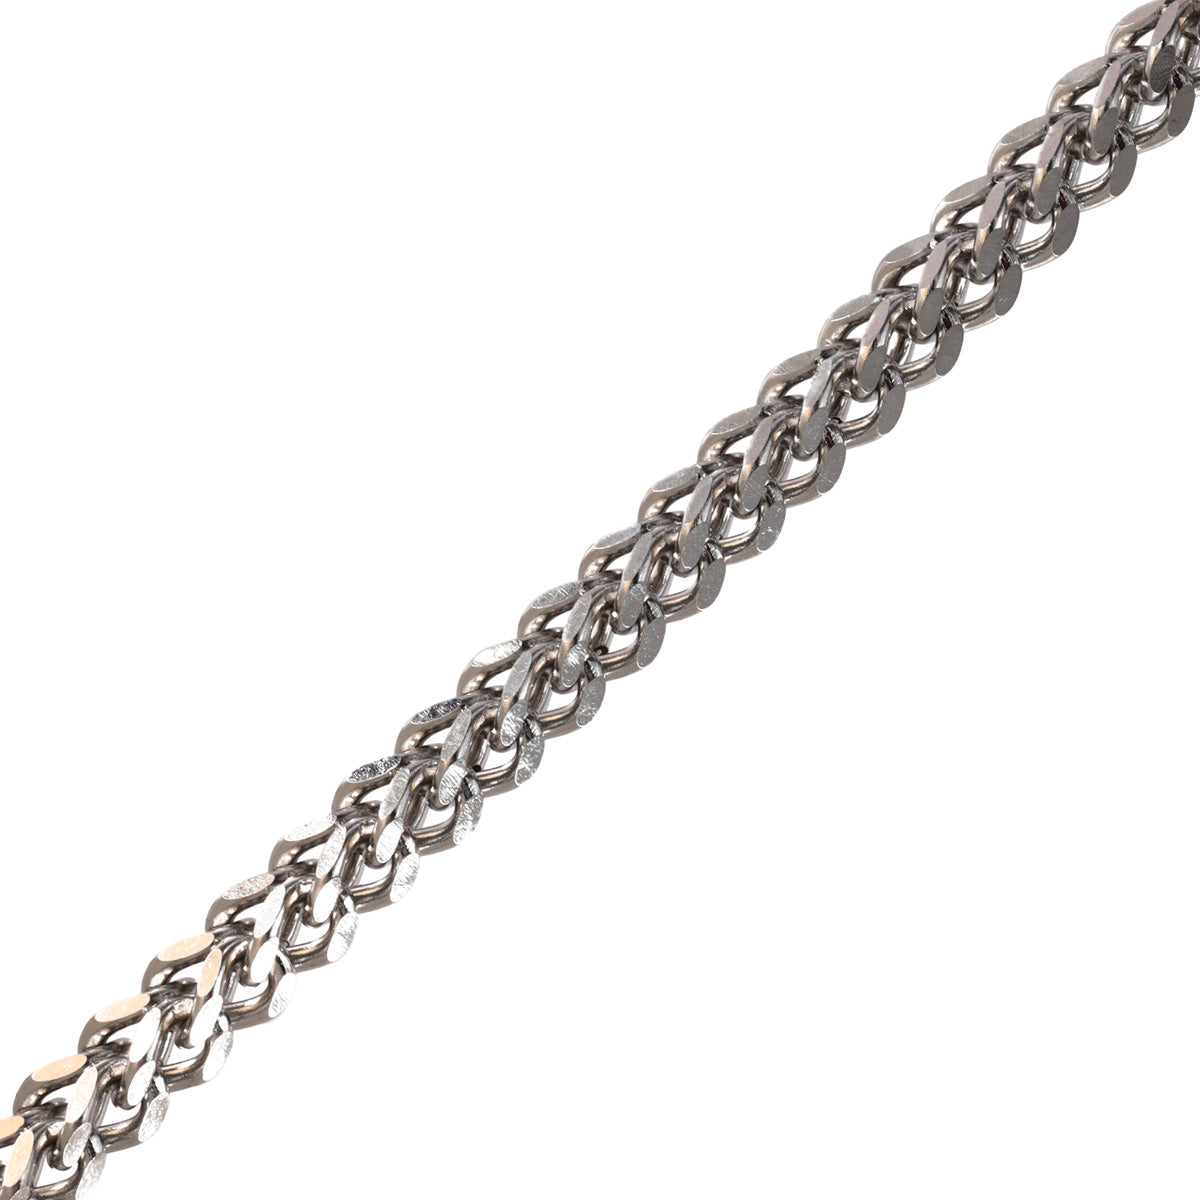 Square armoured chain steel 55cm